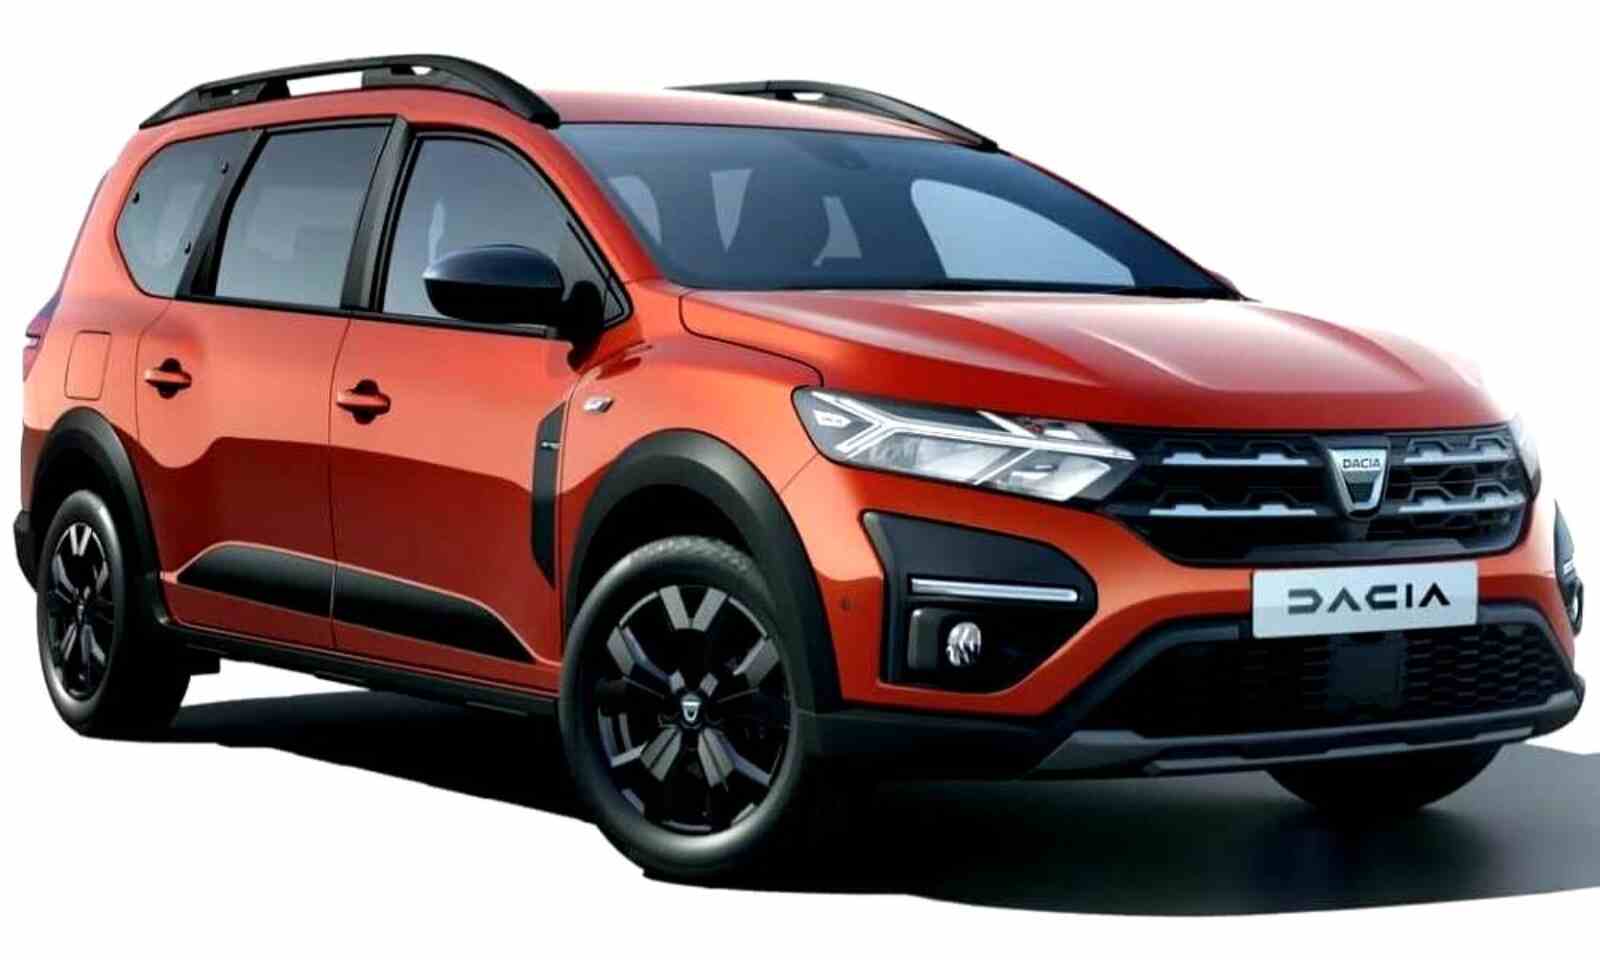 Dacia (Renault) Jogger 7-Seater Crossover Unveiled, India Launch Unlikely